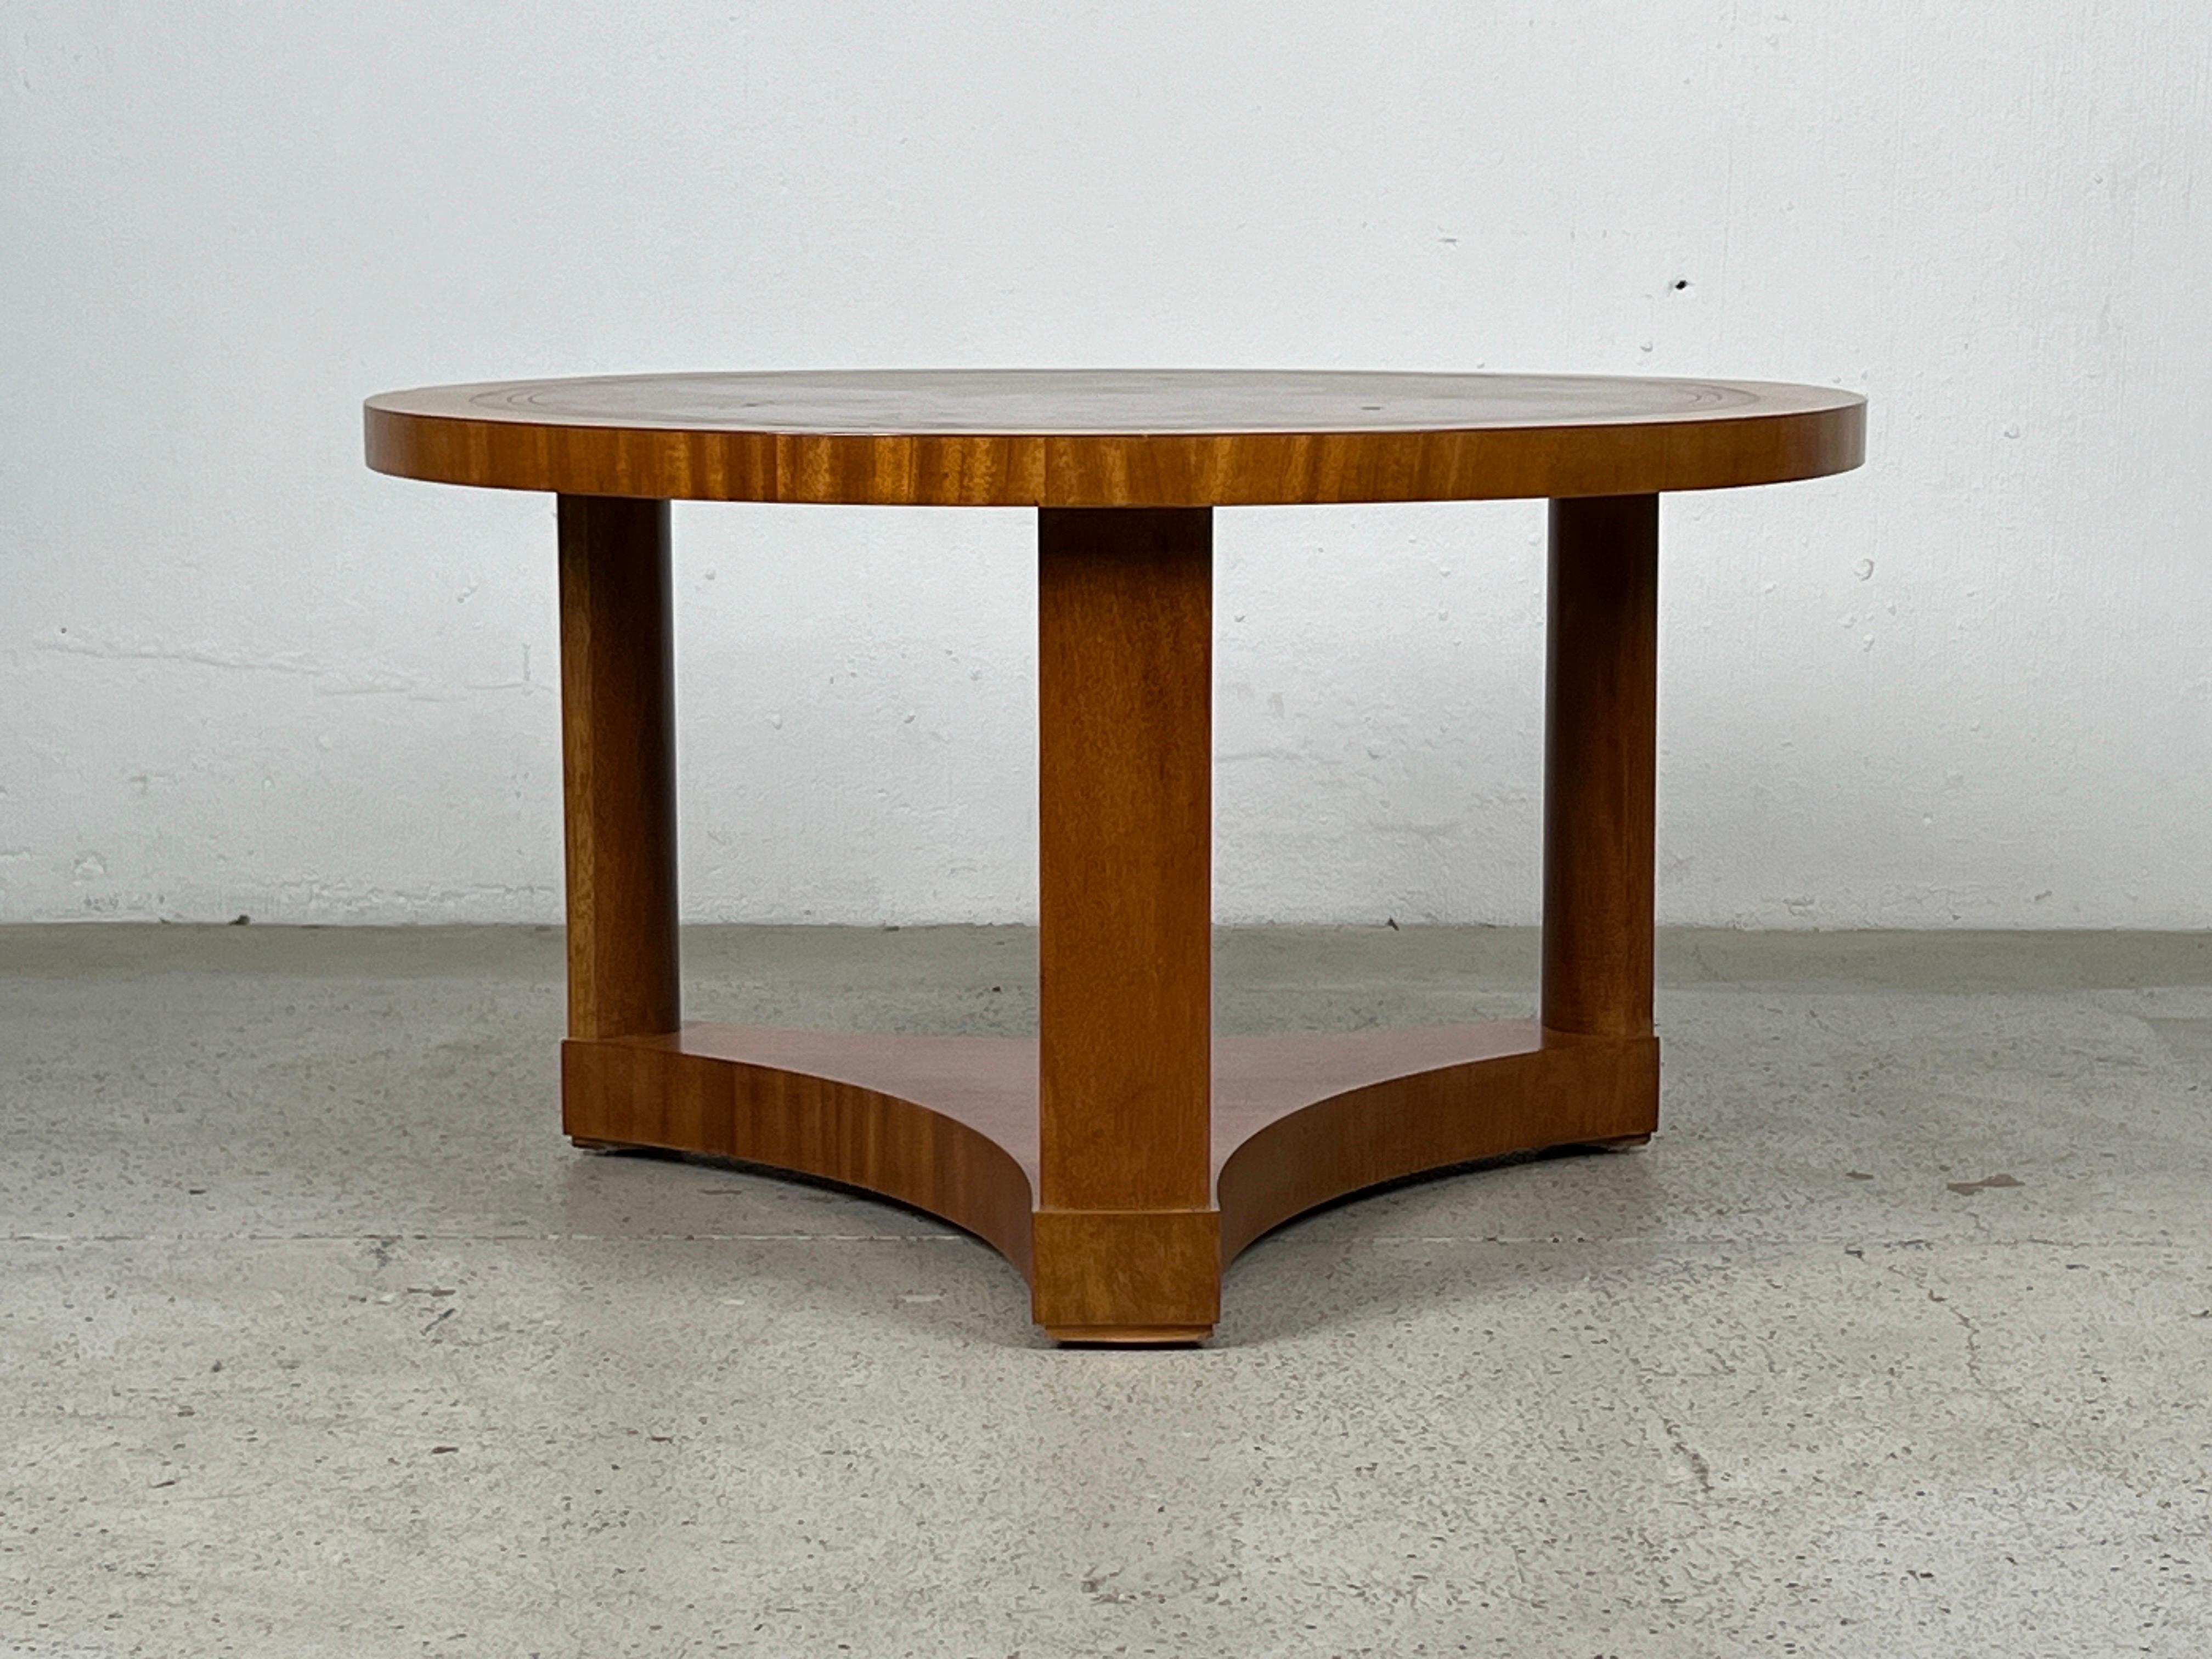 A mahogany table with inset leather top designed by Edward Wormley for Dunbar. 